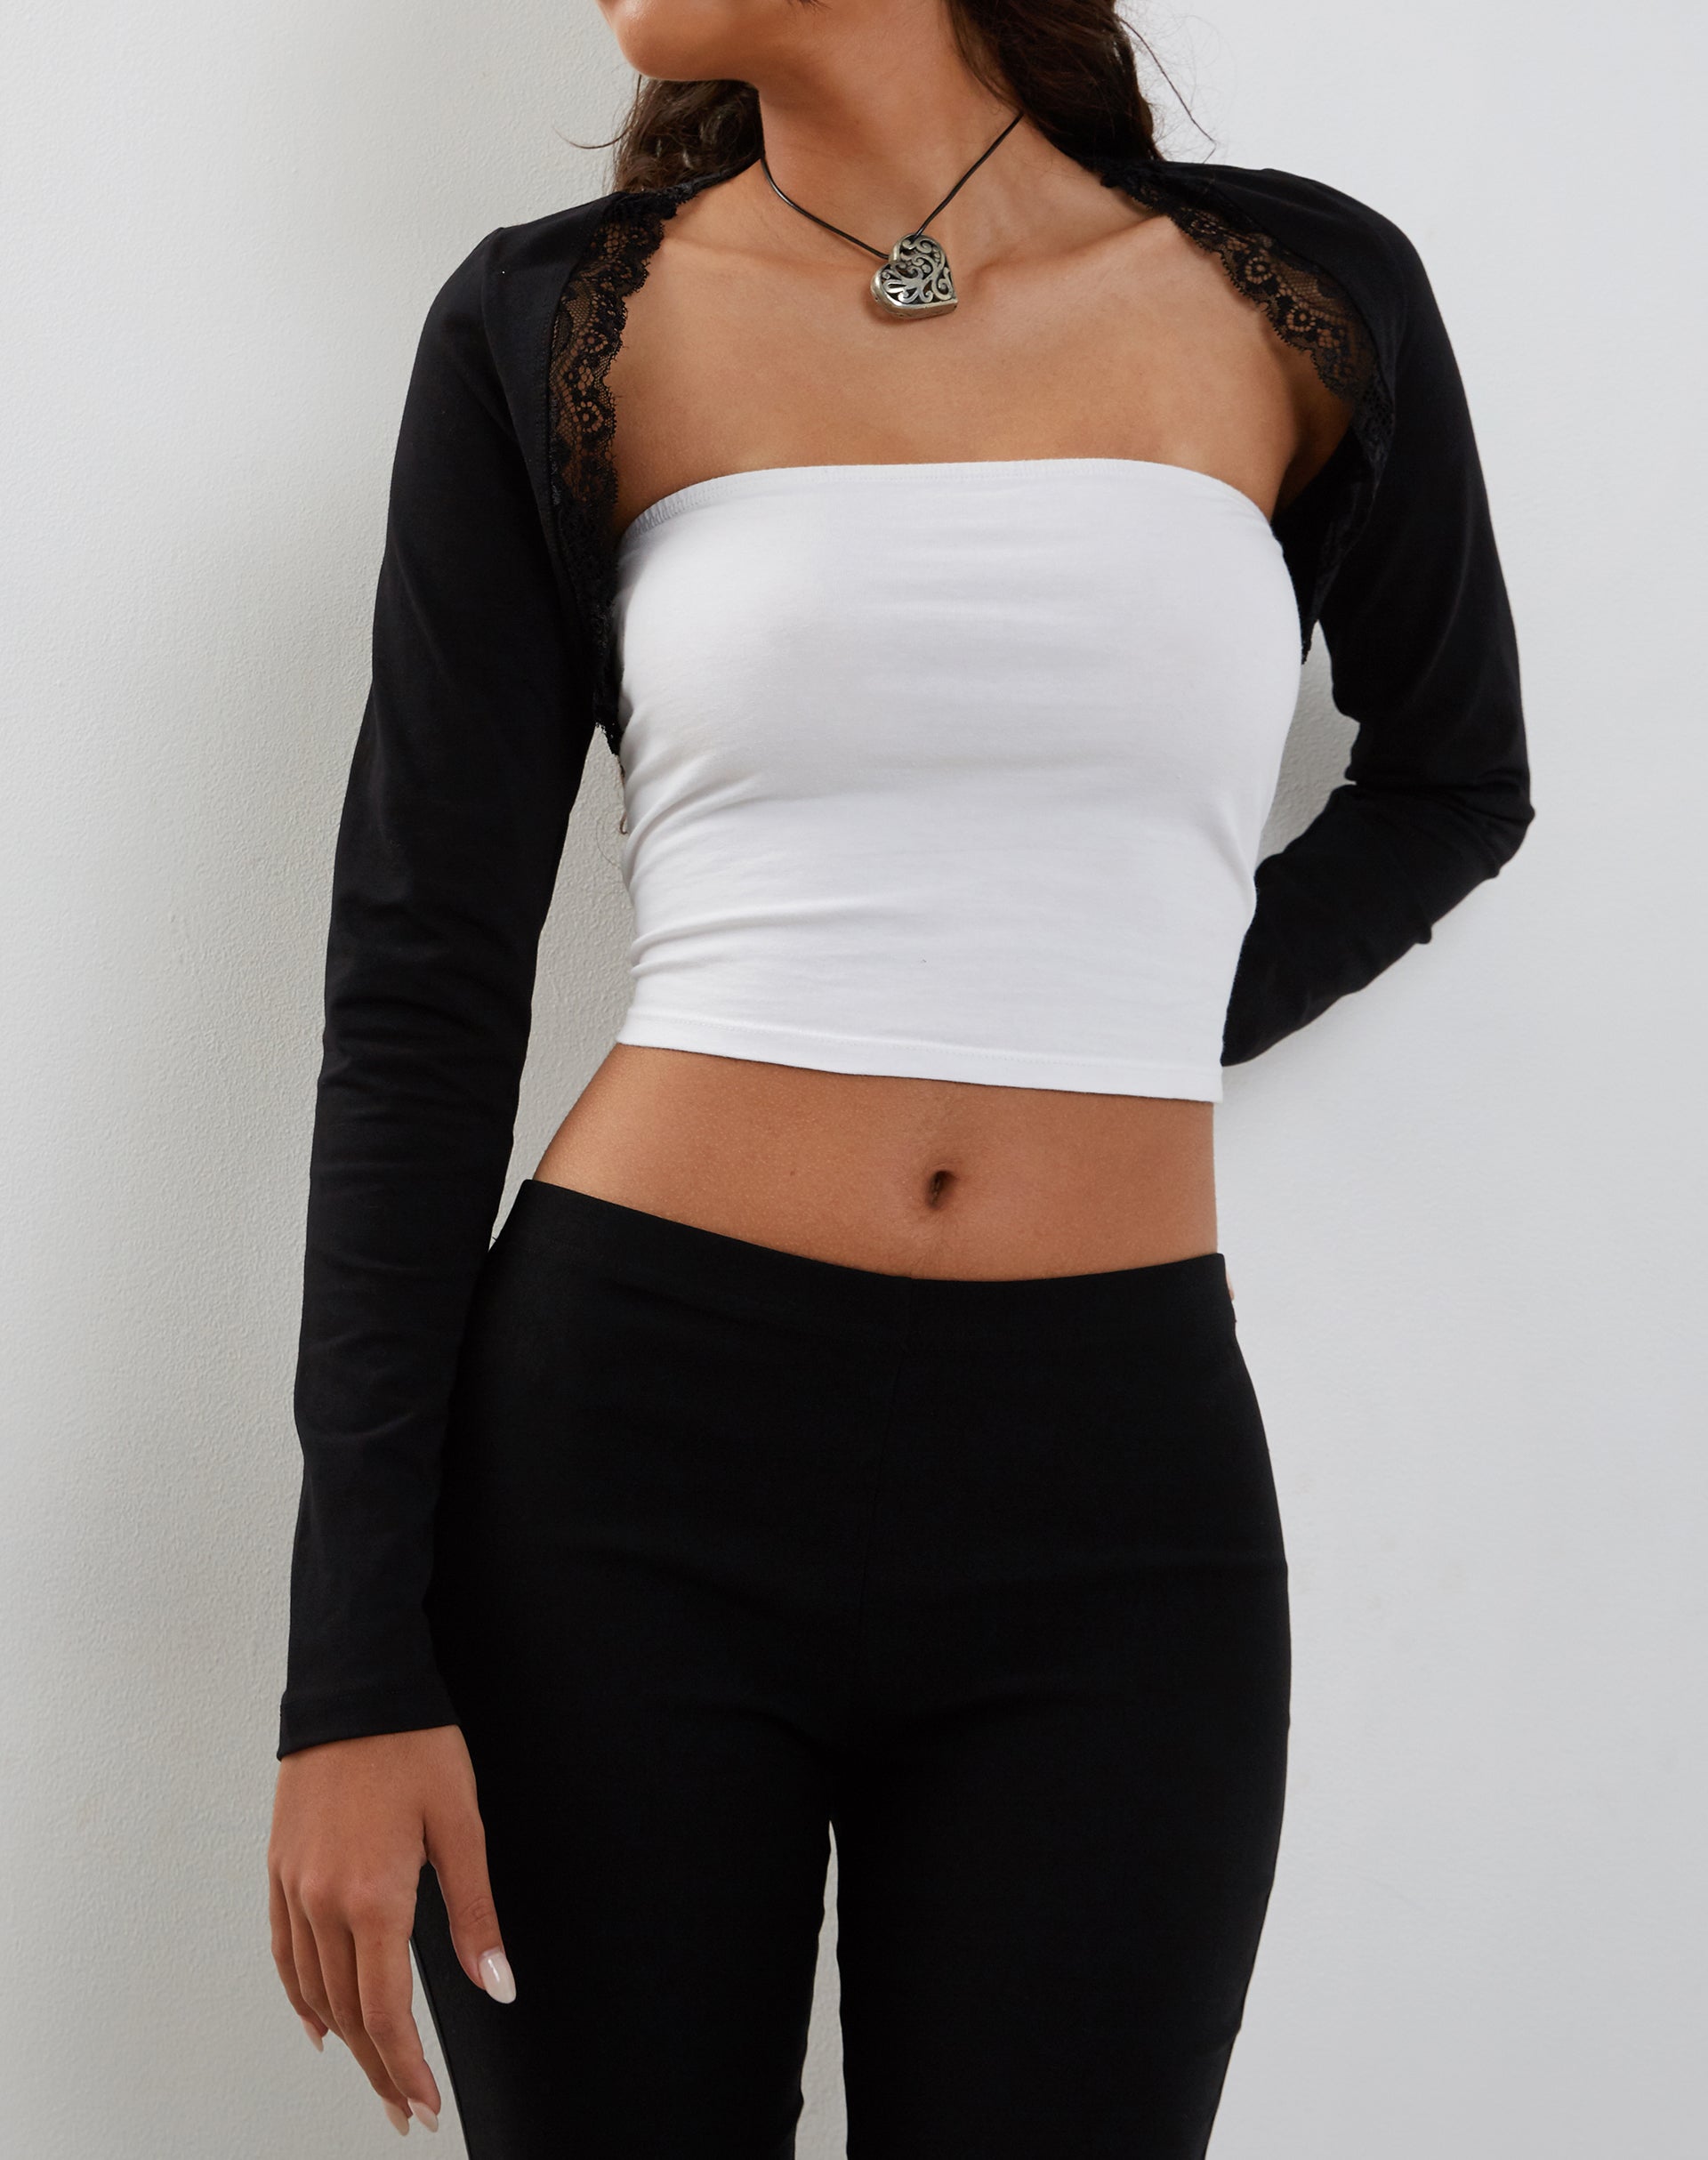 Image of Avya Lace Trim Shrug Top in Lycra Lace Black